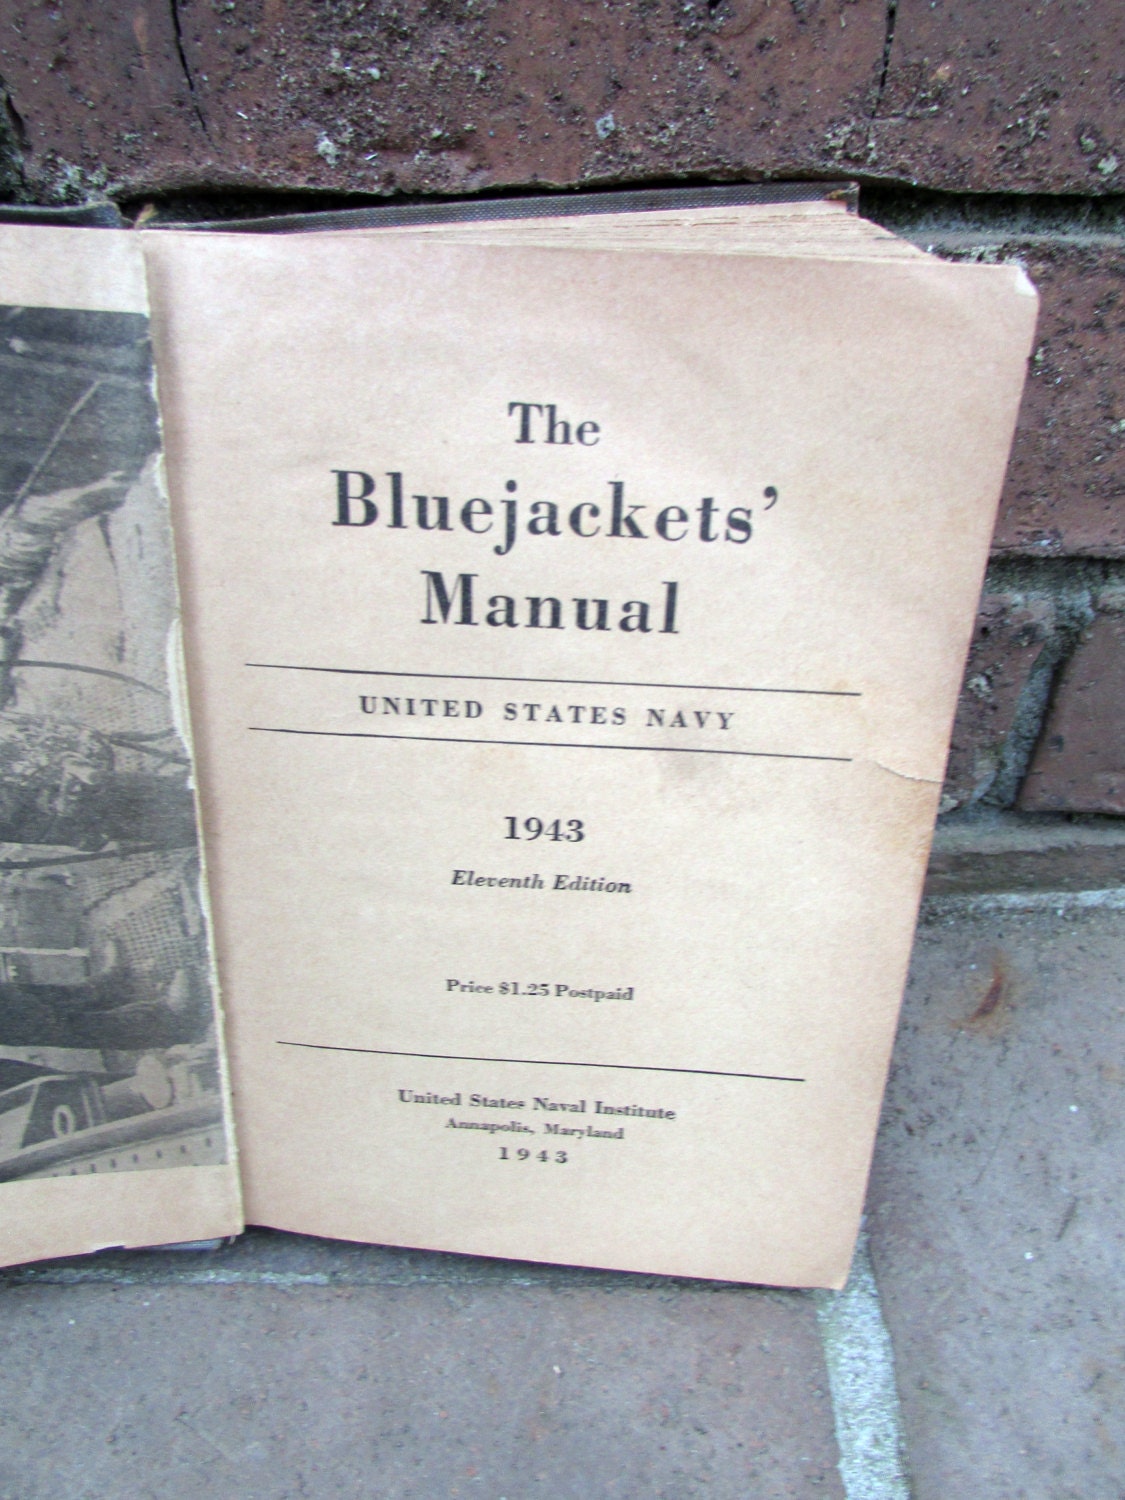 The Bluejacket's Manual 1943 Eleventh Edition by Castellocasa